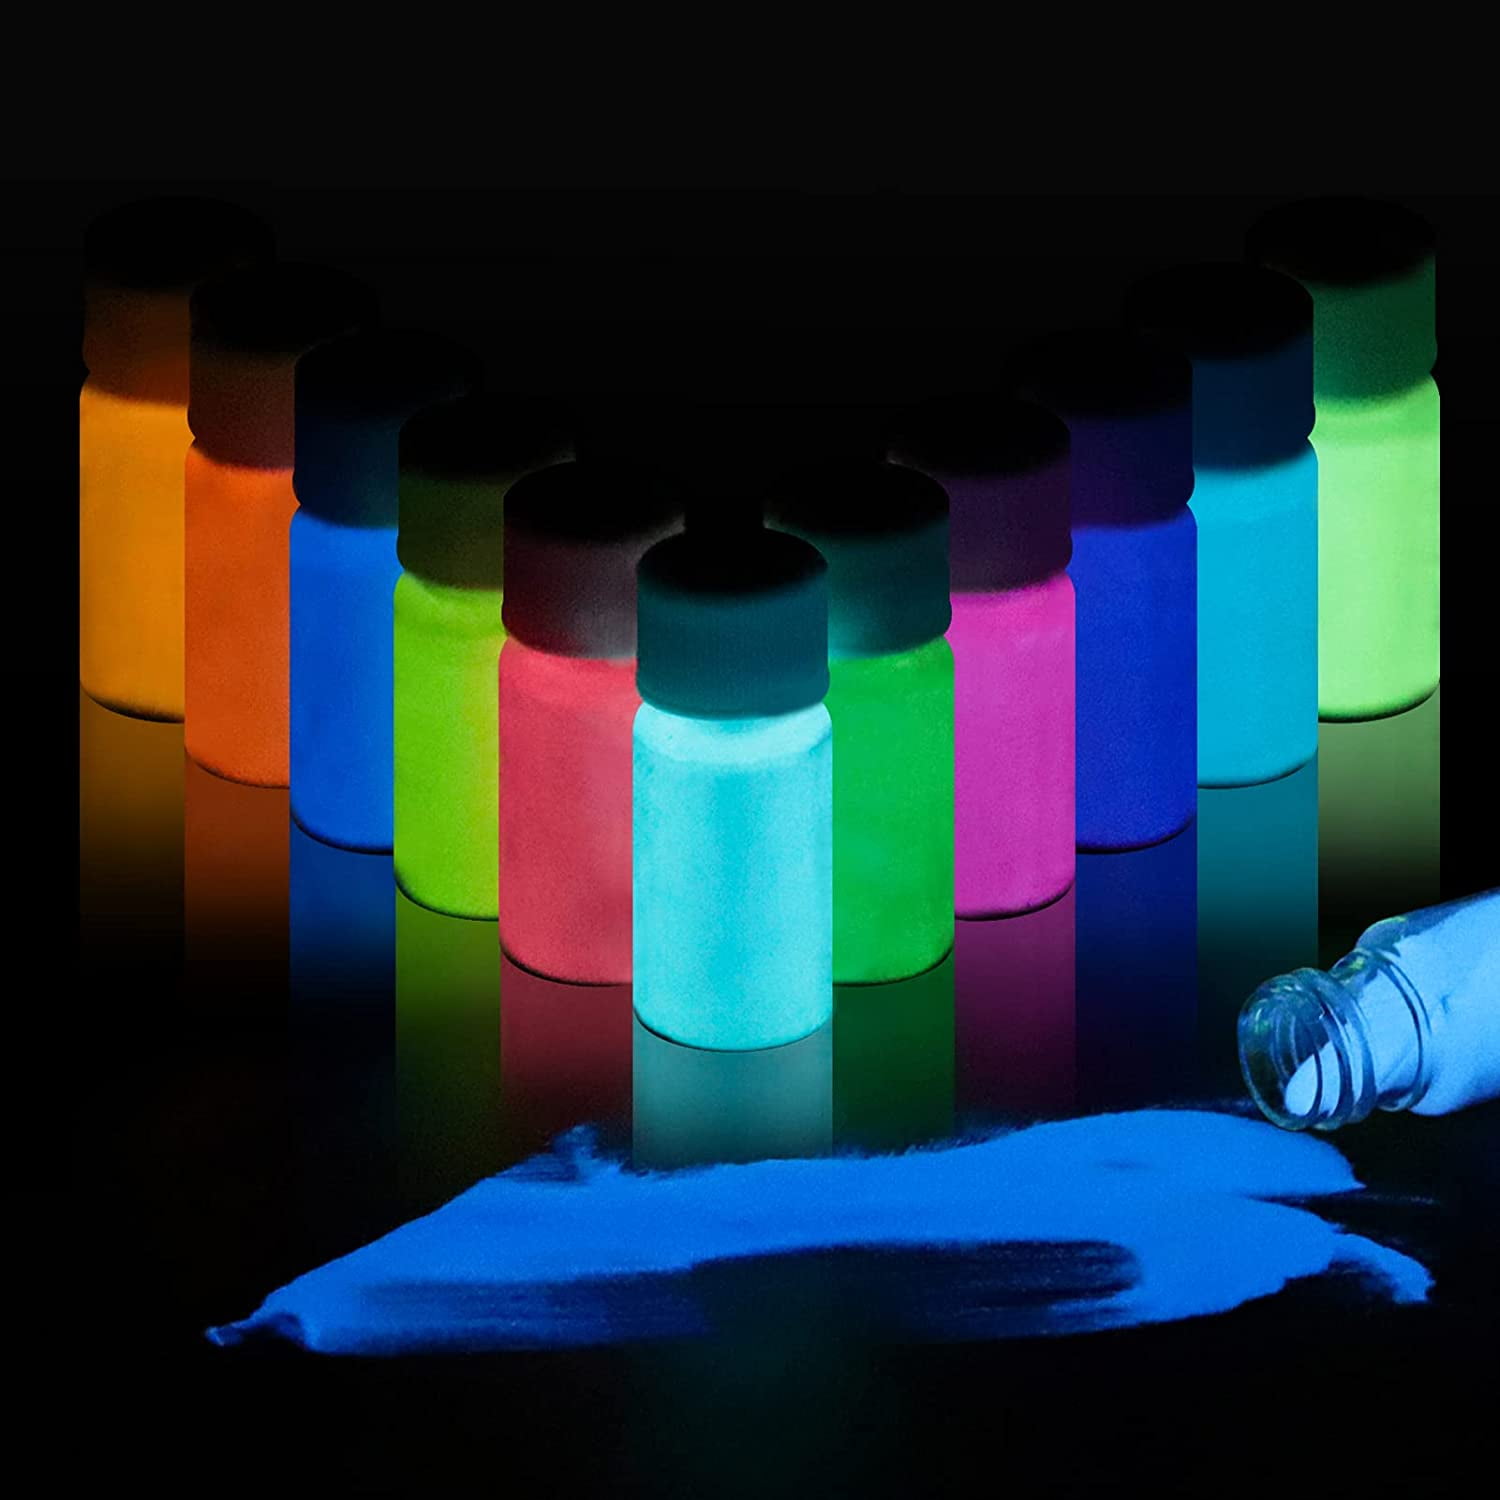 Glow Fluorescent Paint 20g Glow In The Dark Acrylic Luminous Fluorescent  Paint Bright Pigment Graffiti Party Diy Jp Glow In The Dark Pigment Powder  From Happylives, $1.03